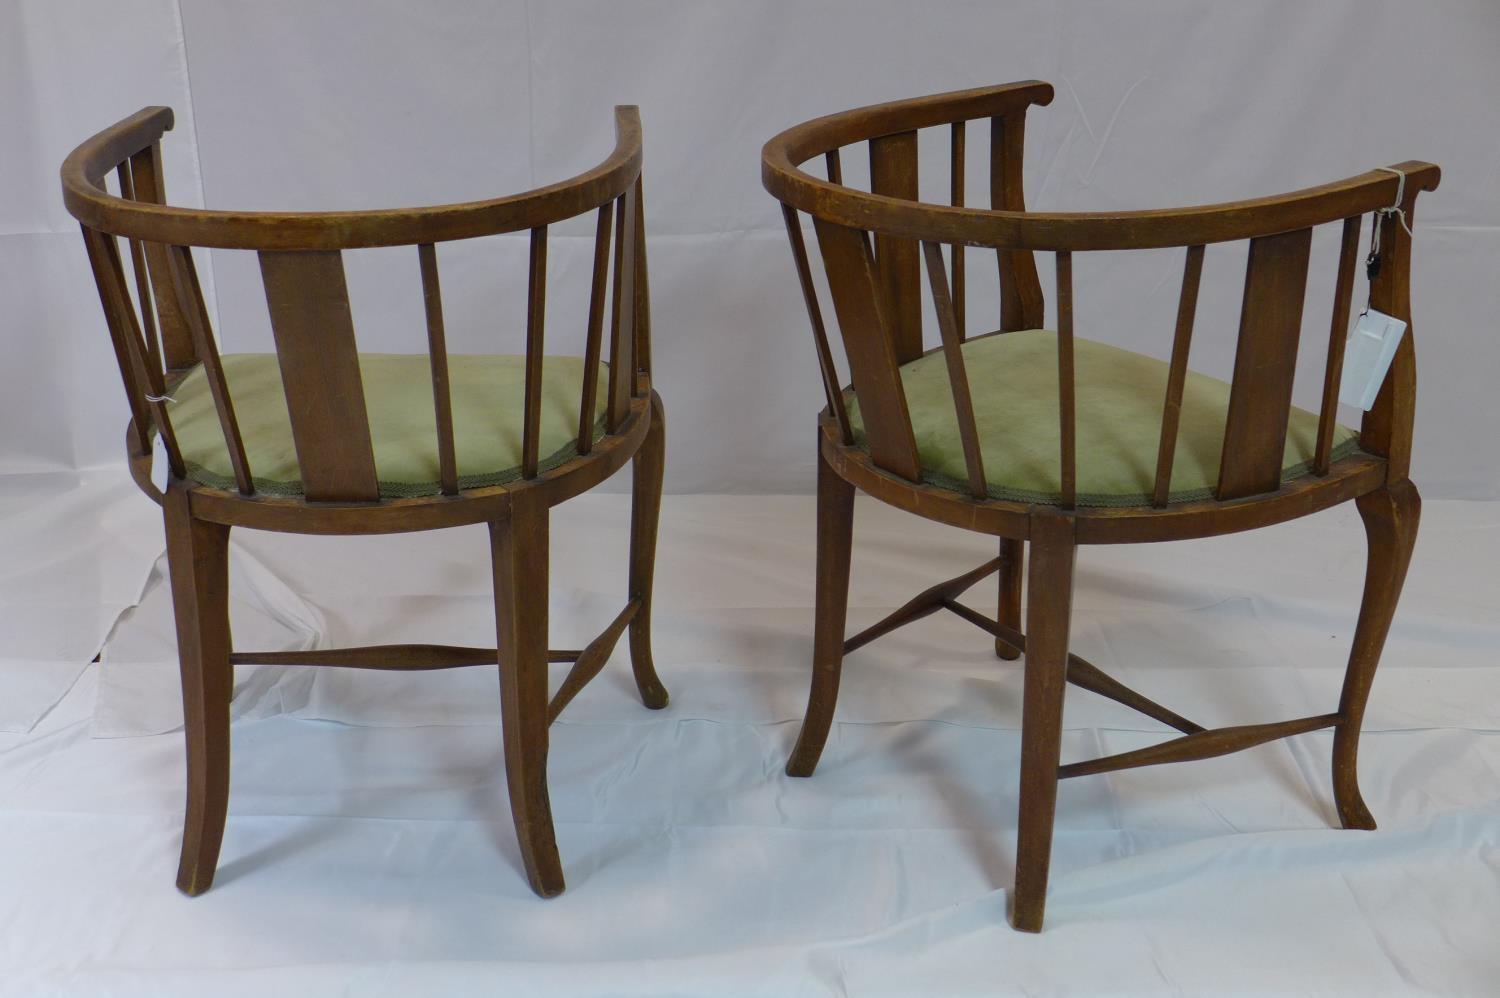 A pair of Edwardian mahogany tub chairs with velour seats - Image 3 of 4